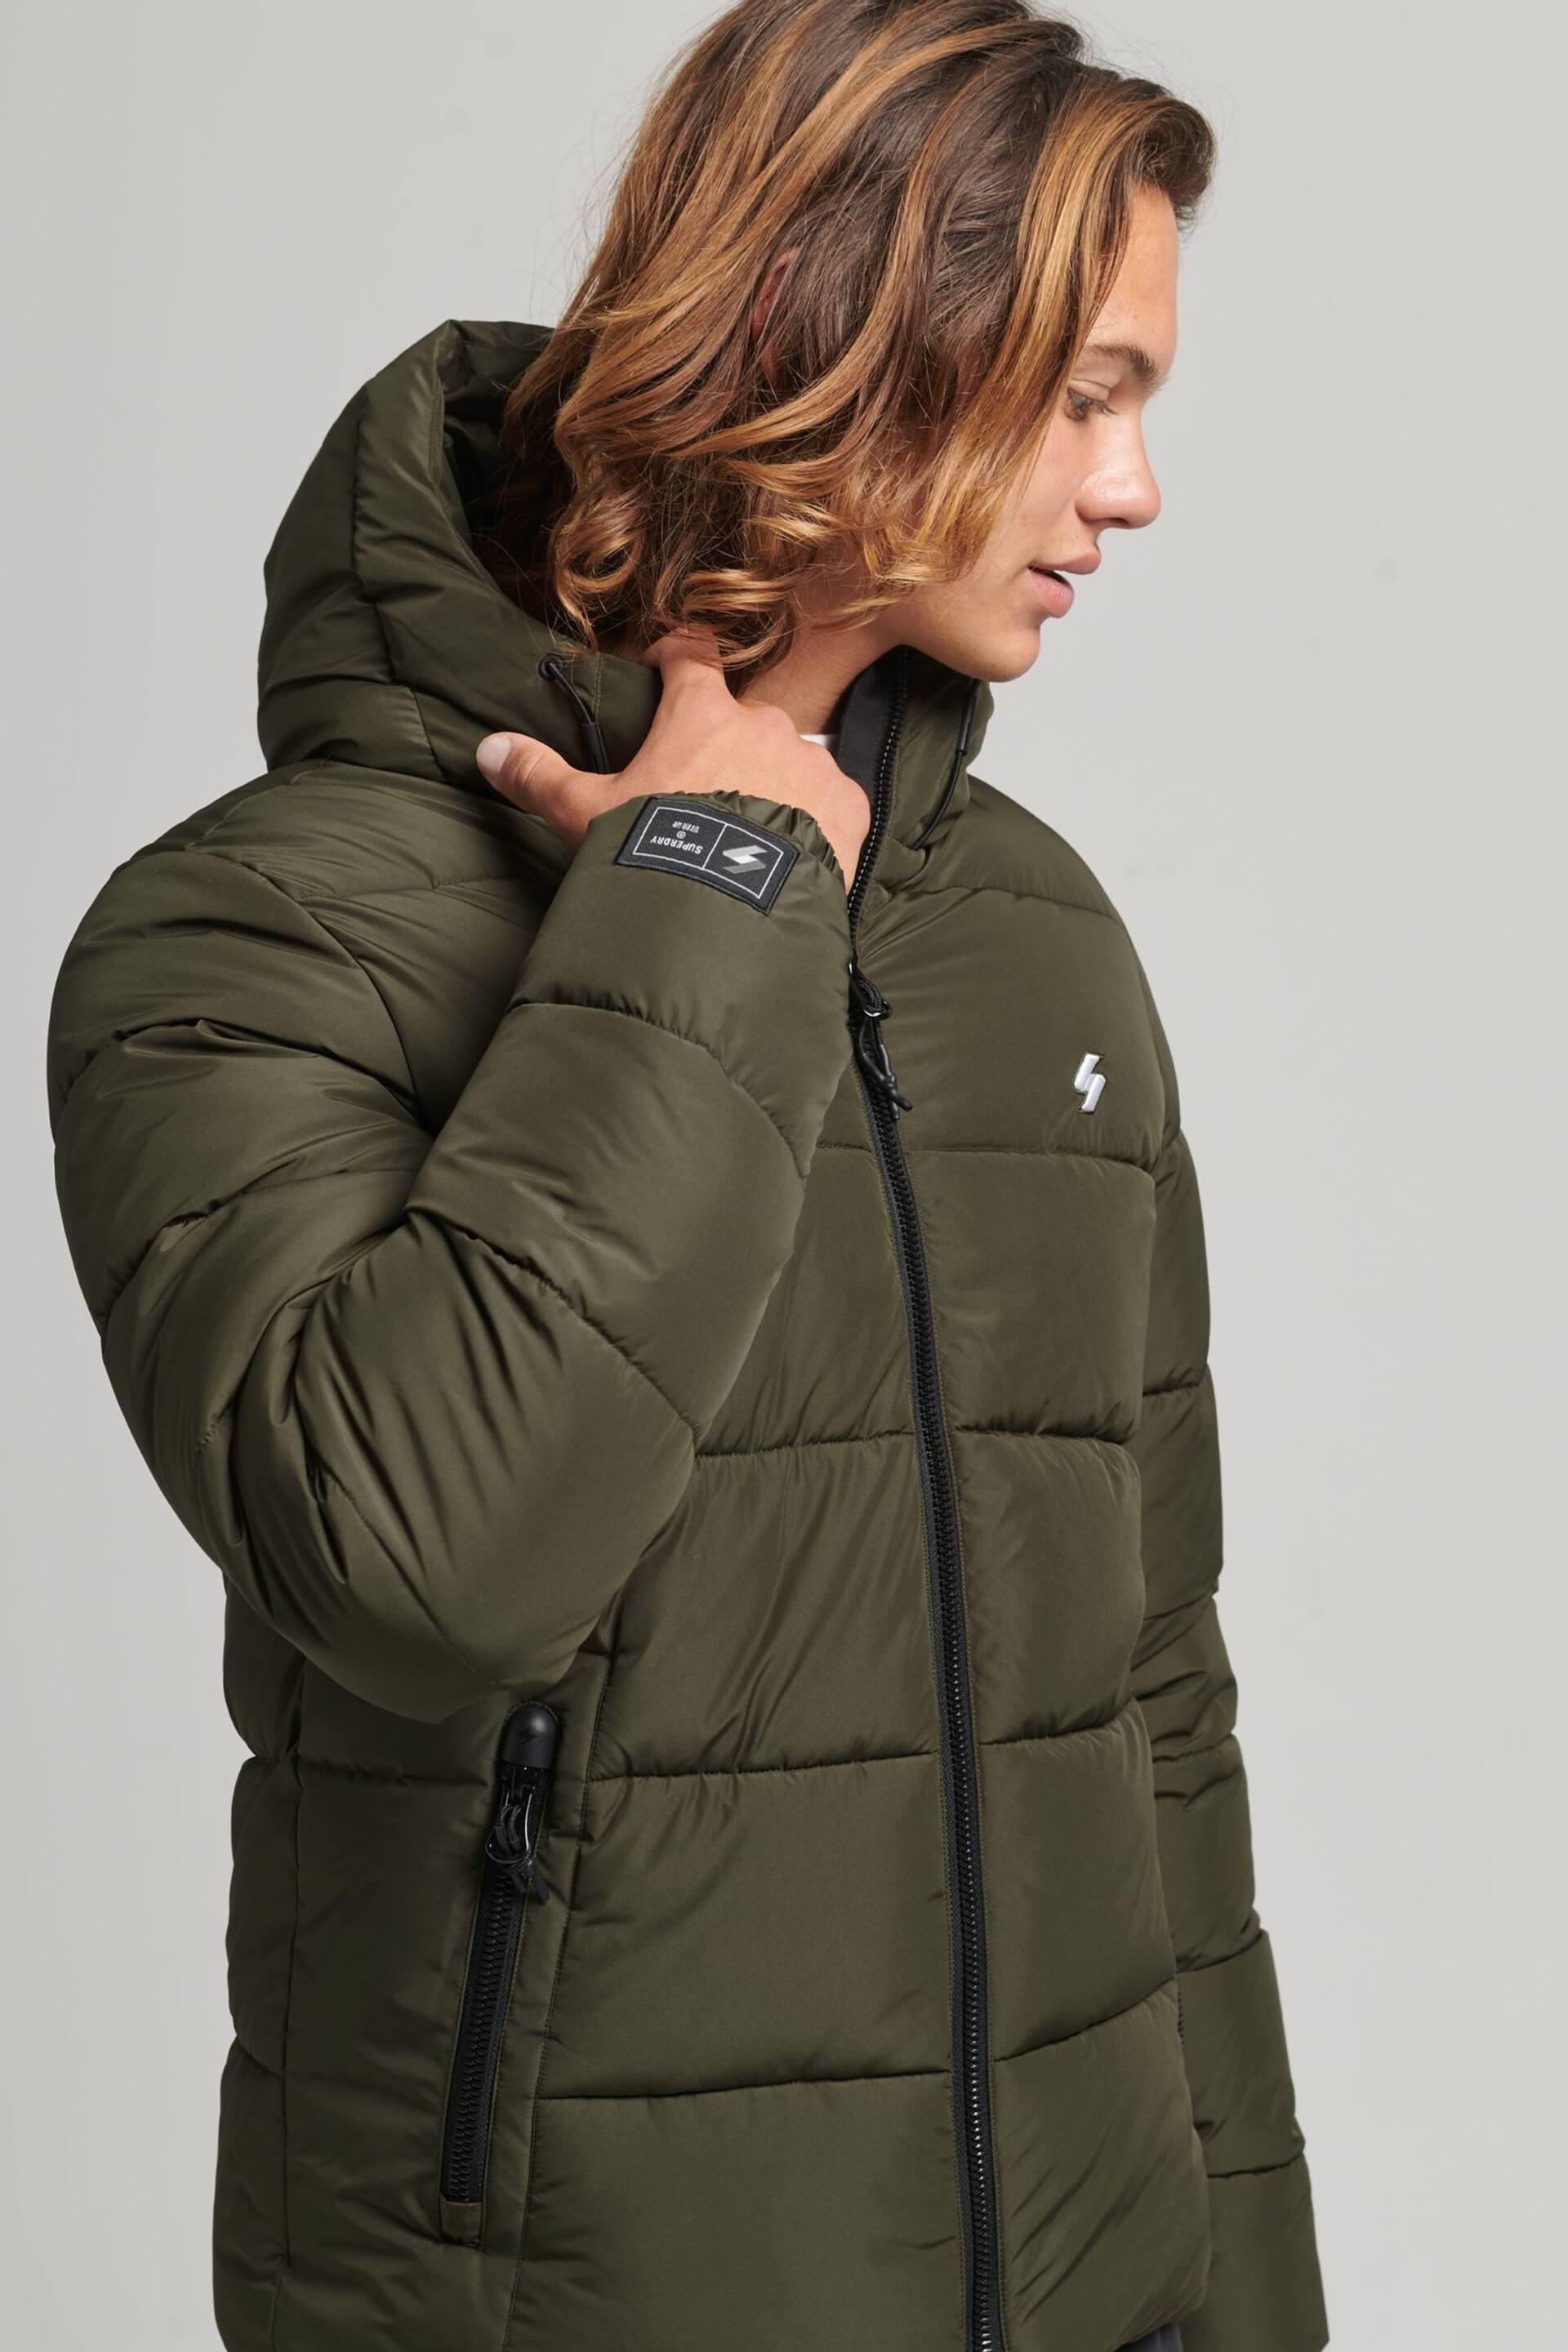 Superdry Dark Moss Hooded Mens Sports Puffer Jacket - Image 1 of 6